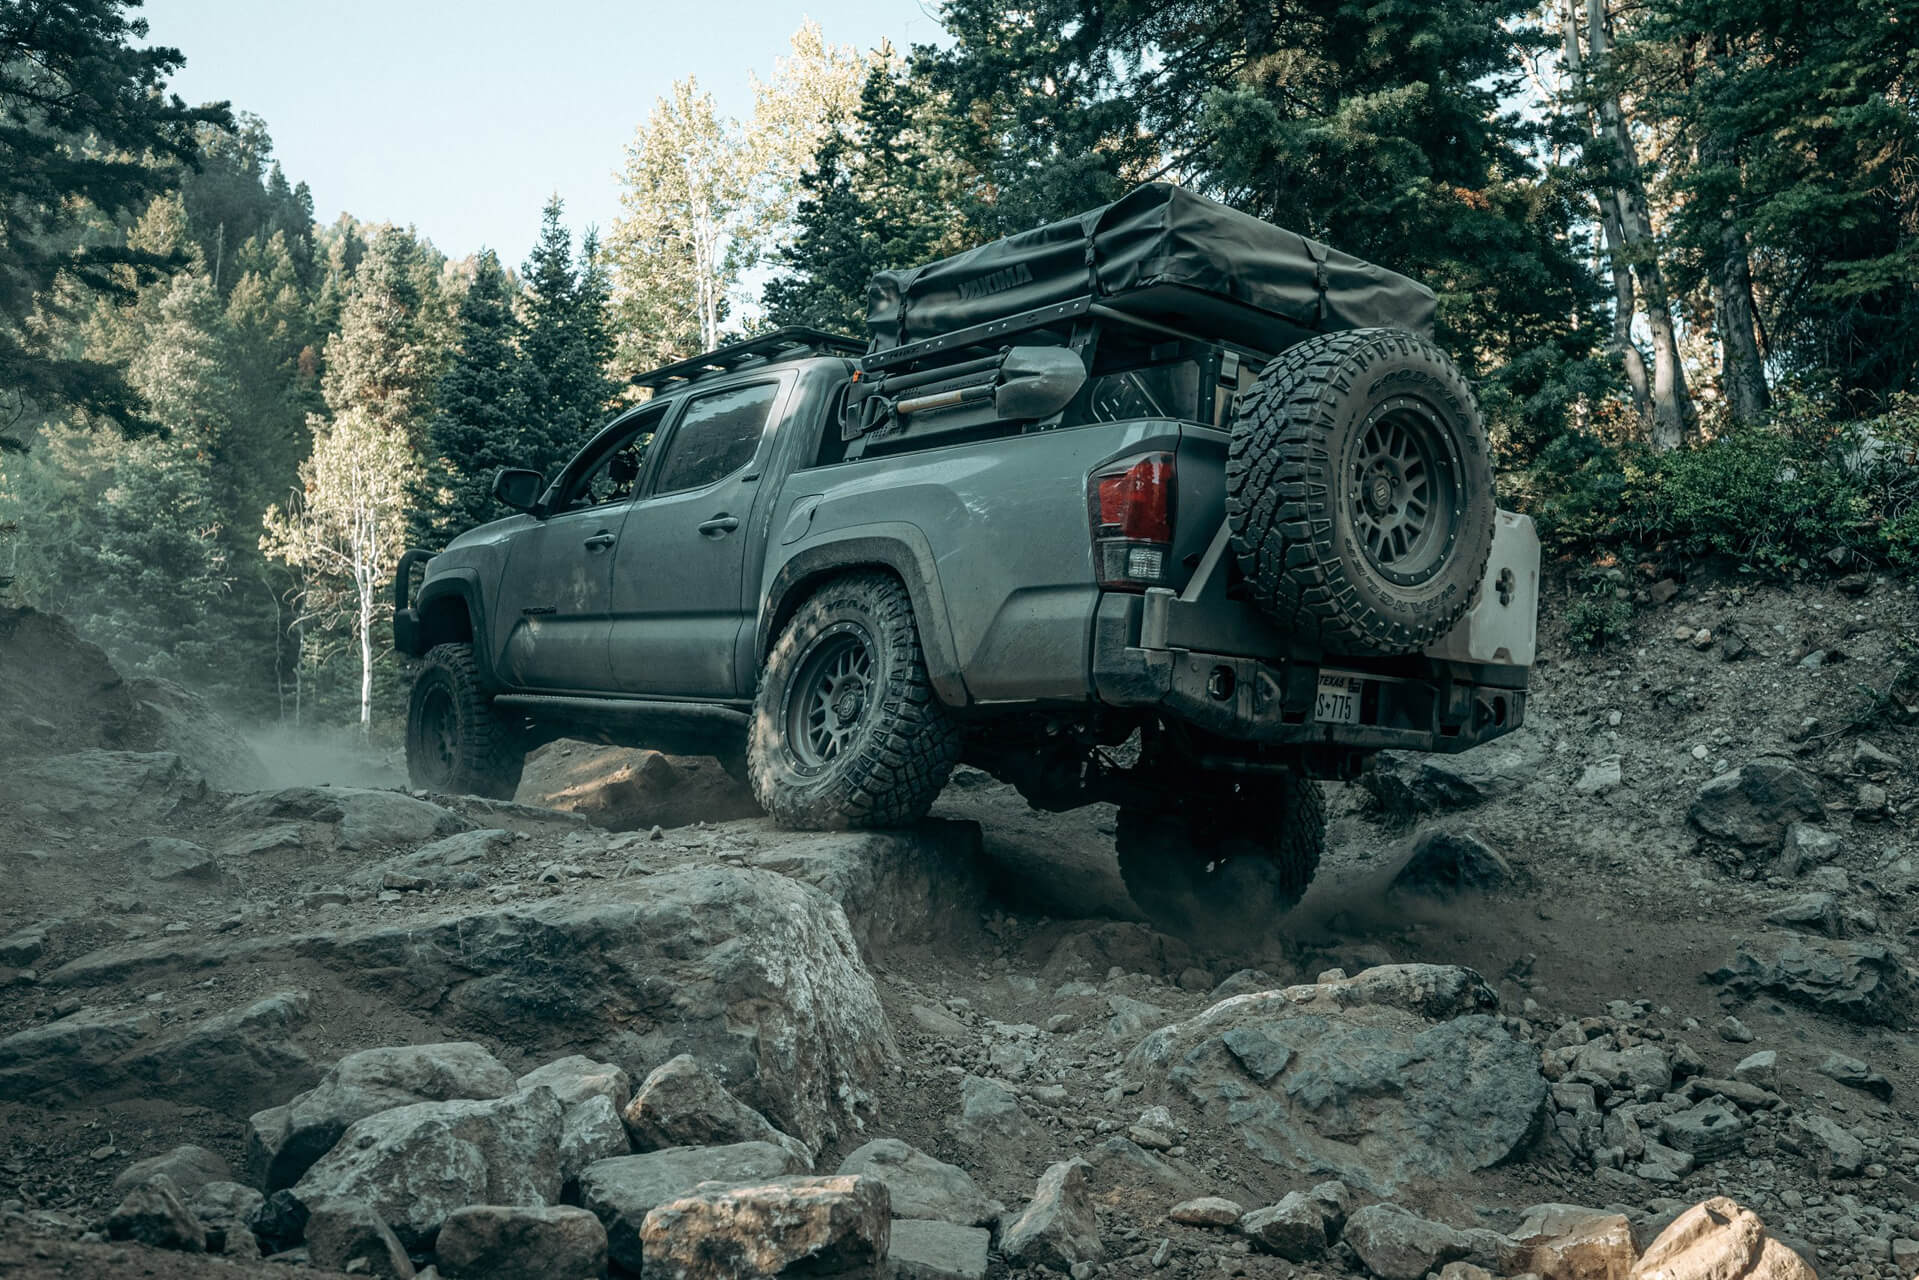 ARB Overlanding Build Targets Approachability | THE SHOP